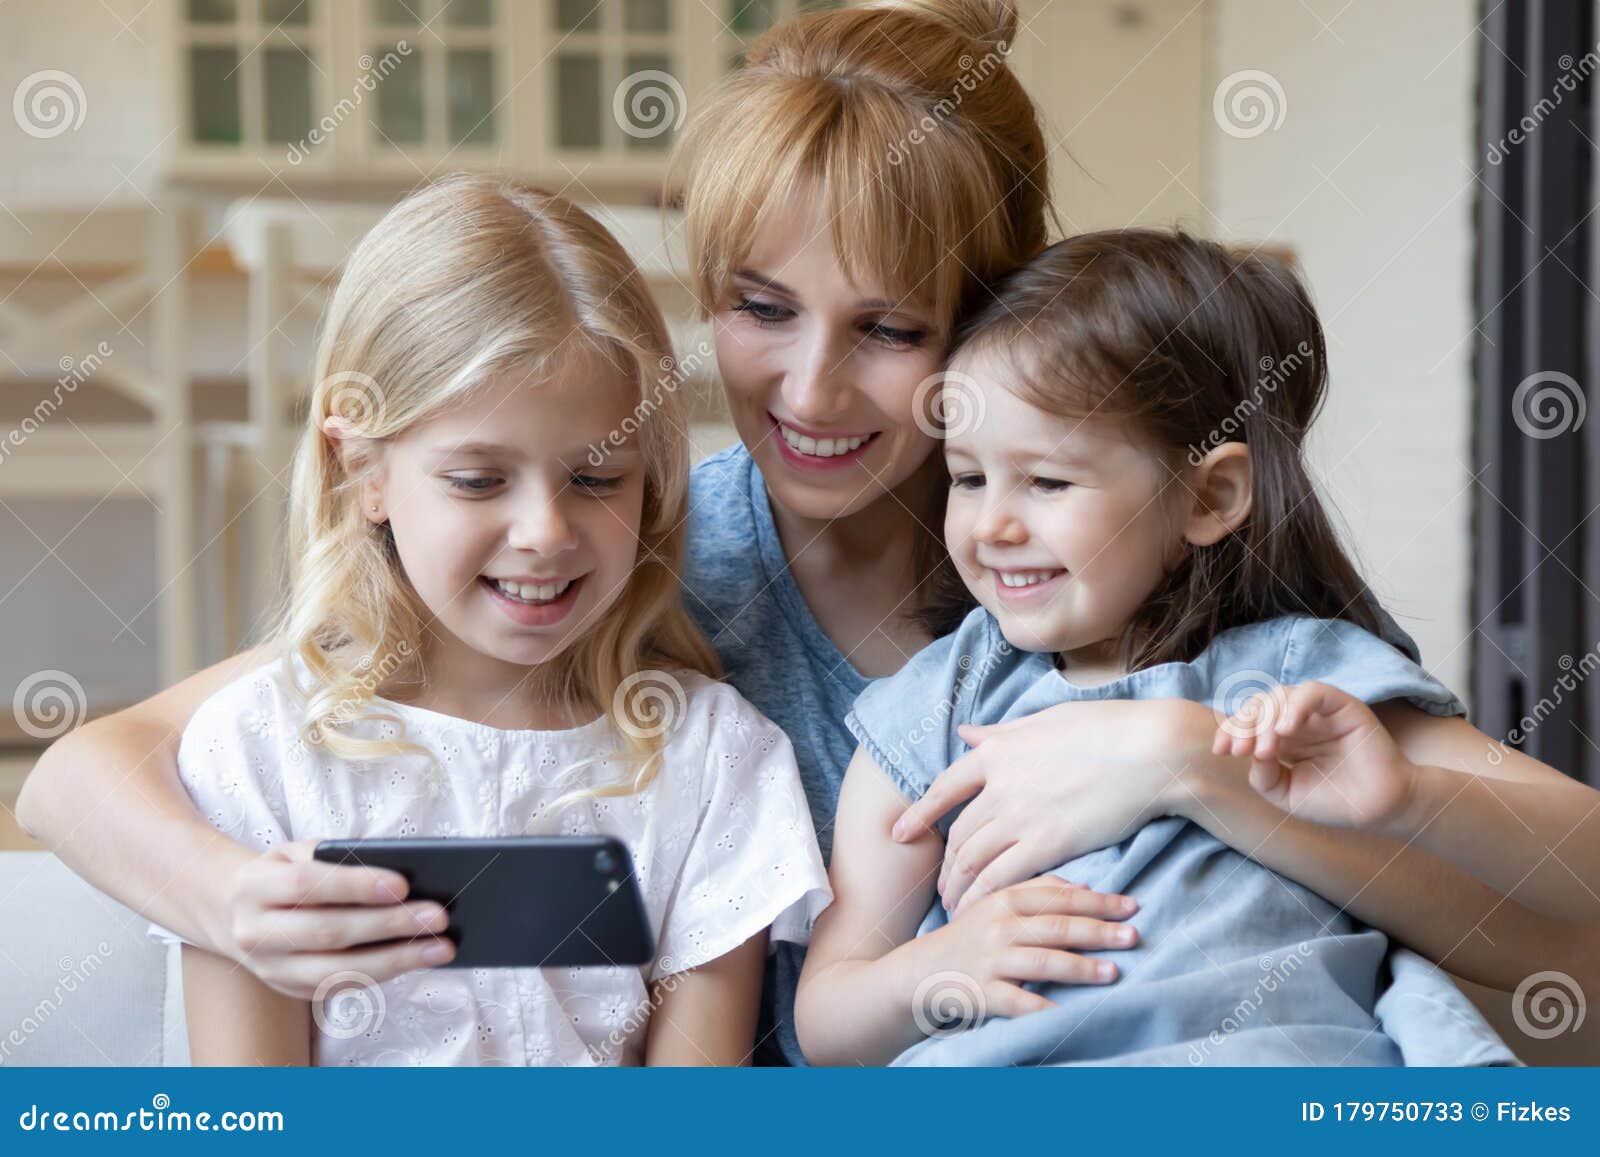 Close Up Happy Mother with Little Children Using Smartphone Together ...